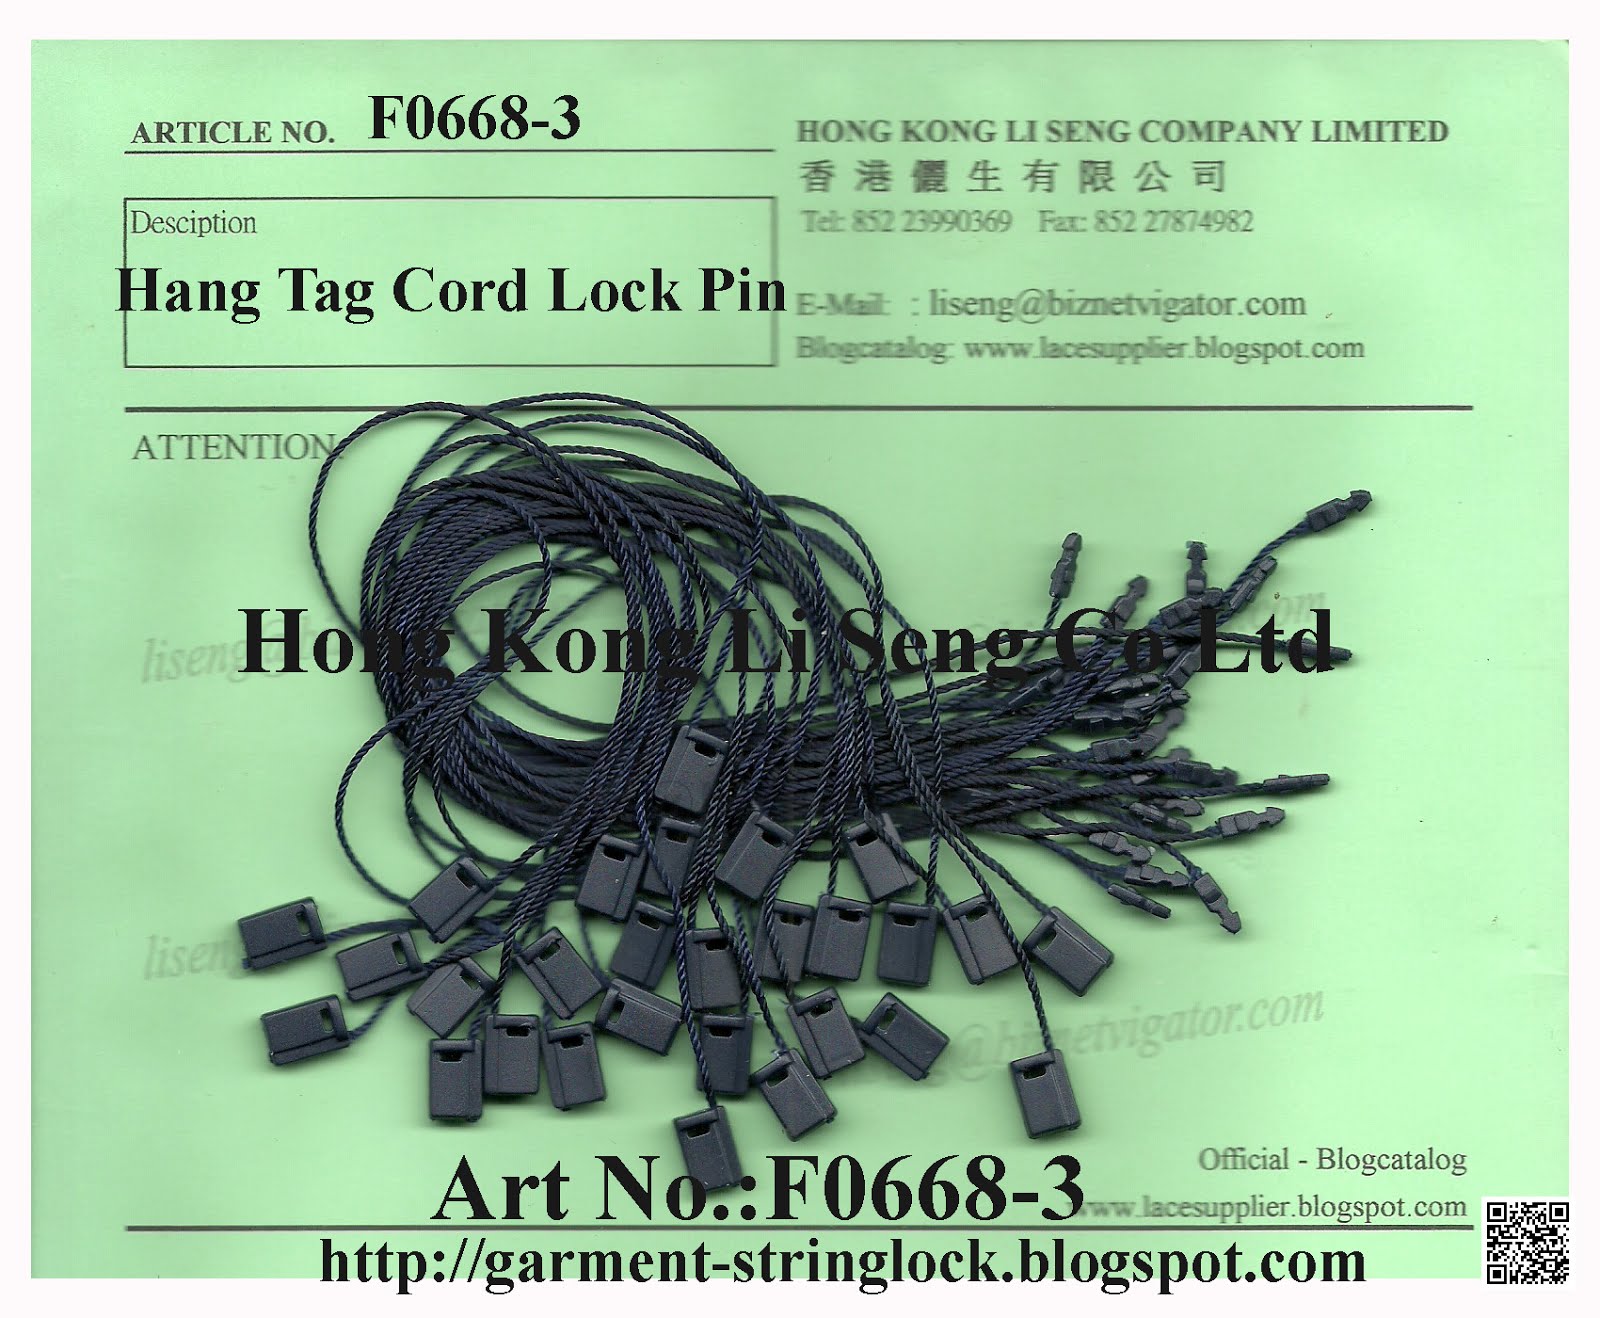 Common Hang Tag Cord Lock Pin Manufacturer Wholesaler and Supplier